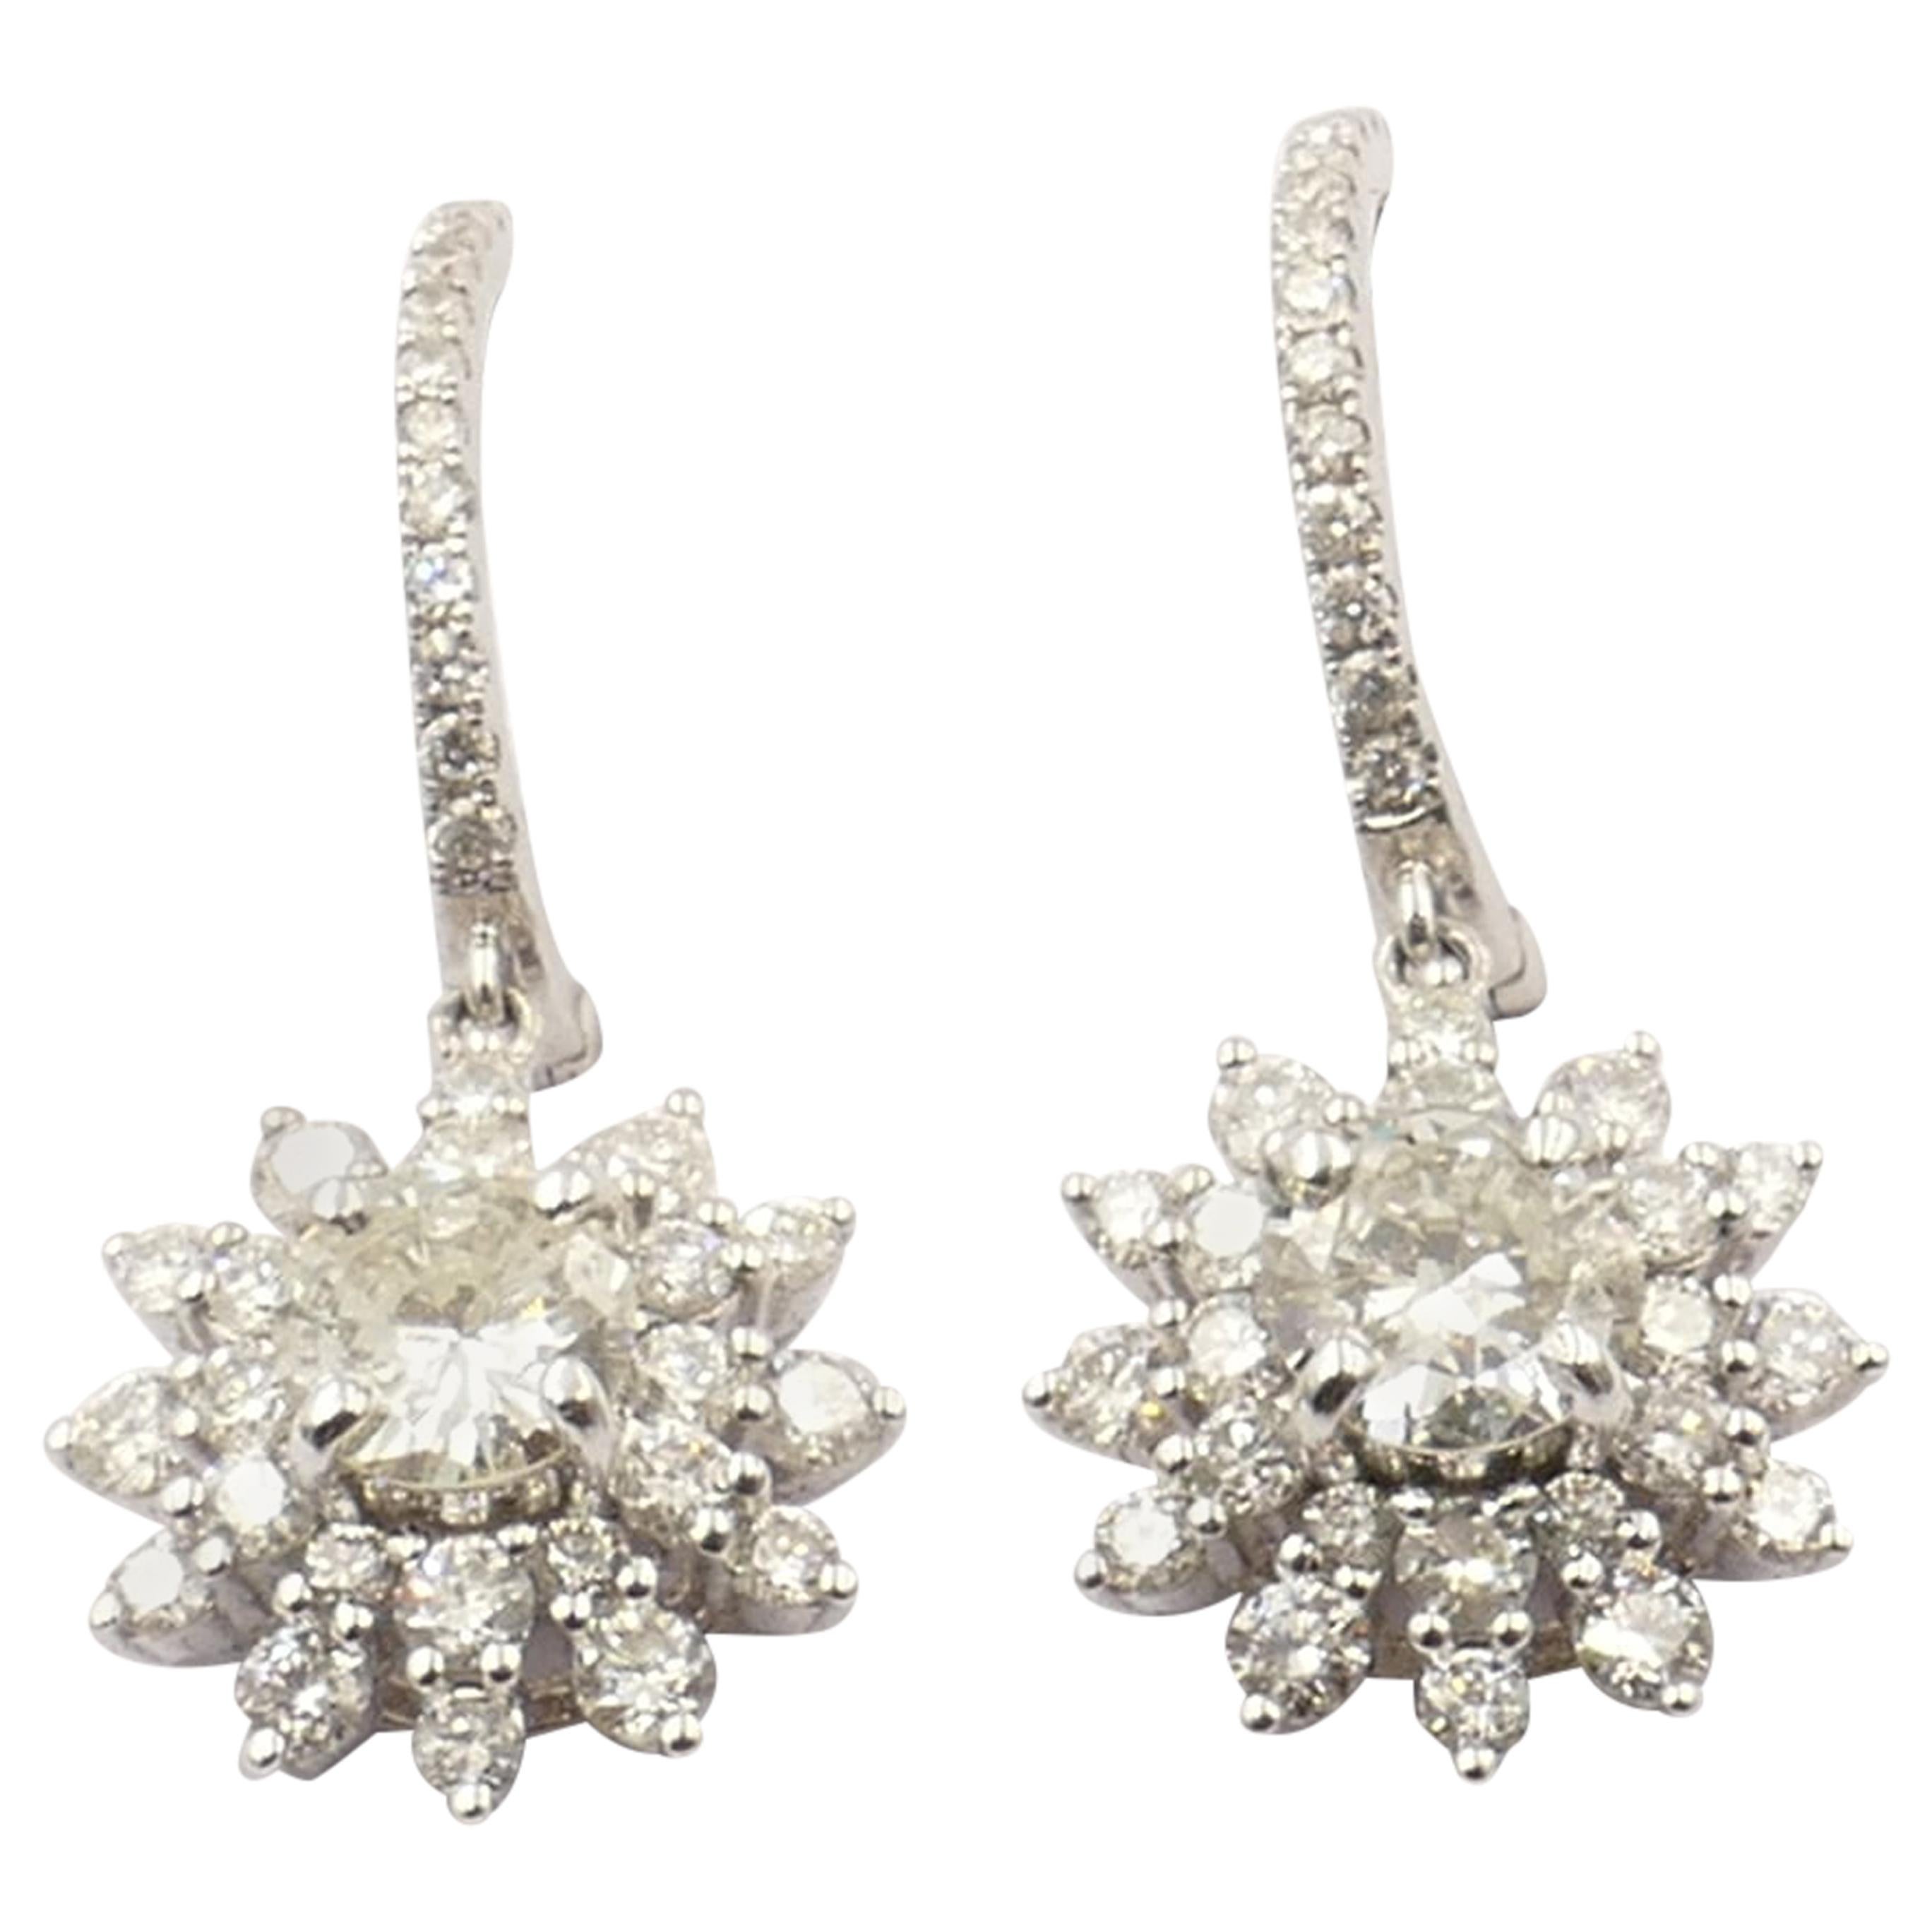 18 Carat White Gold High Level Diamond "Flower" Style Drop Earrings For Sale